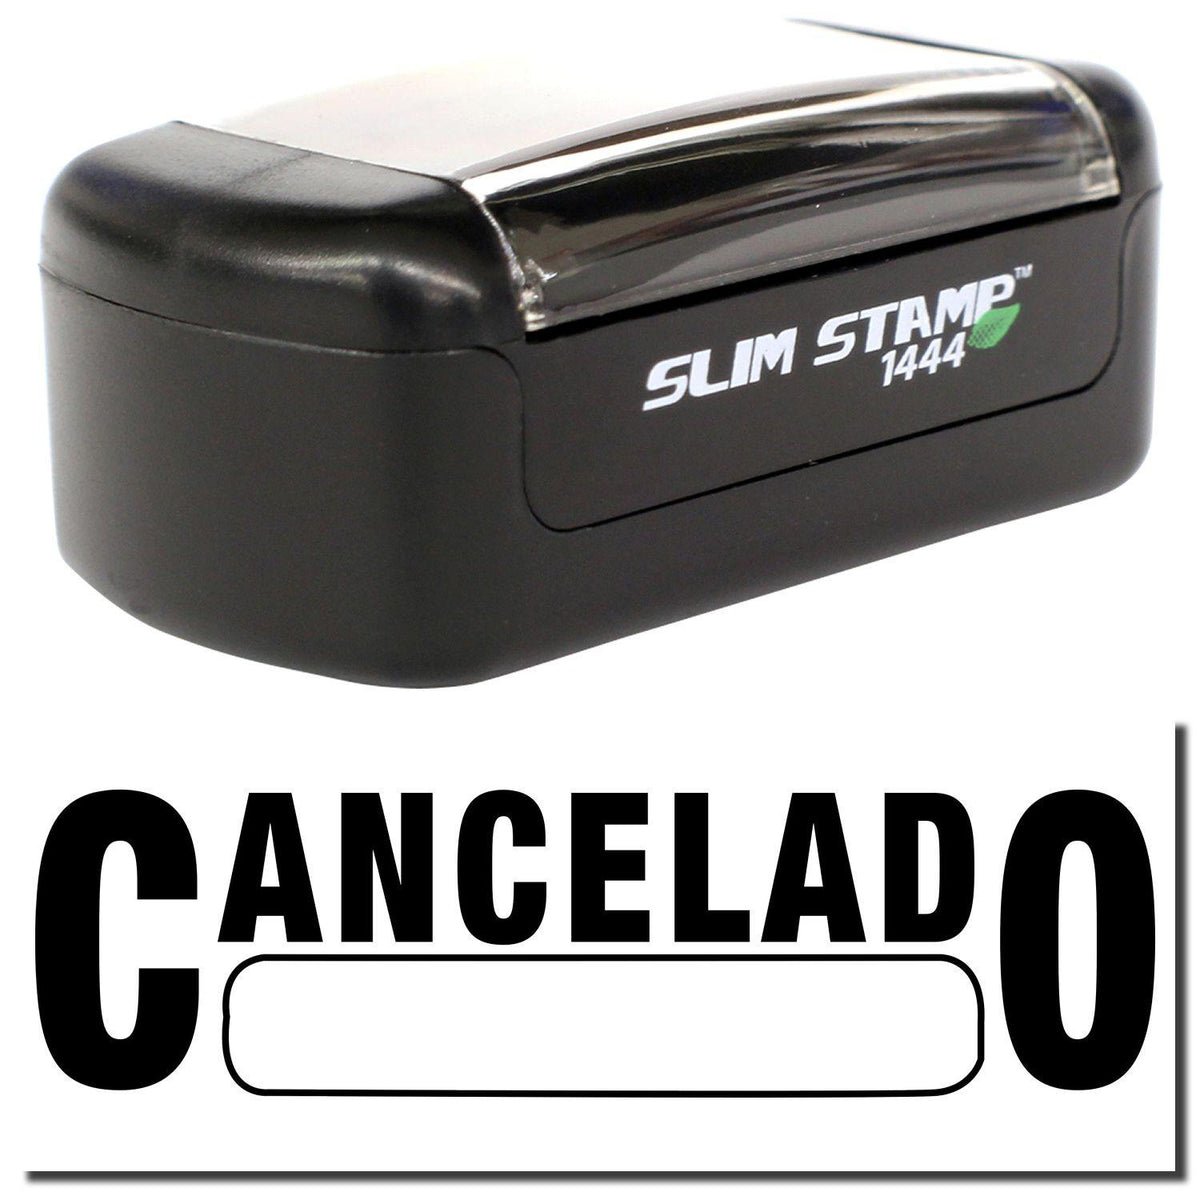 A stock office pre-inked stamp with a stamped image showing how the text &quot;CANCELADO&quot; with a box is displayed after stamping.